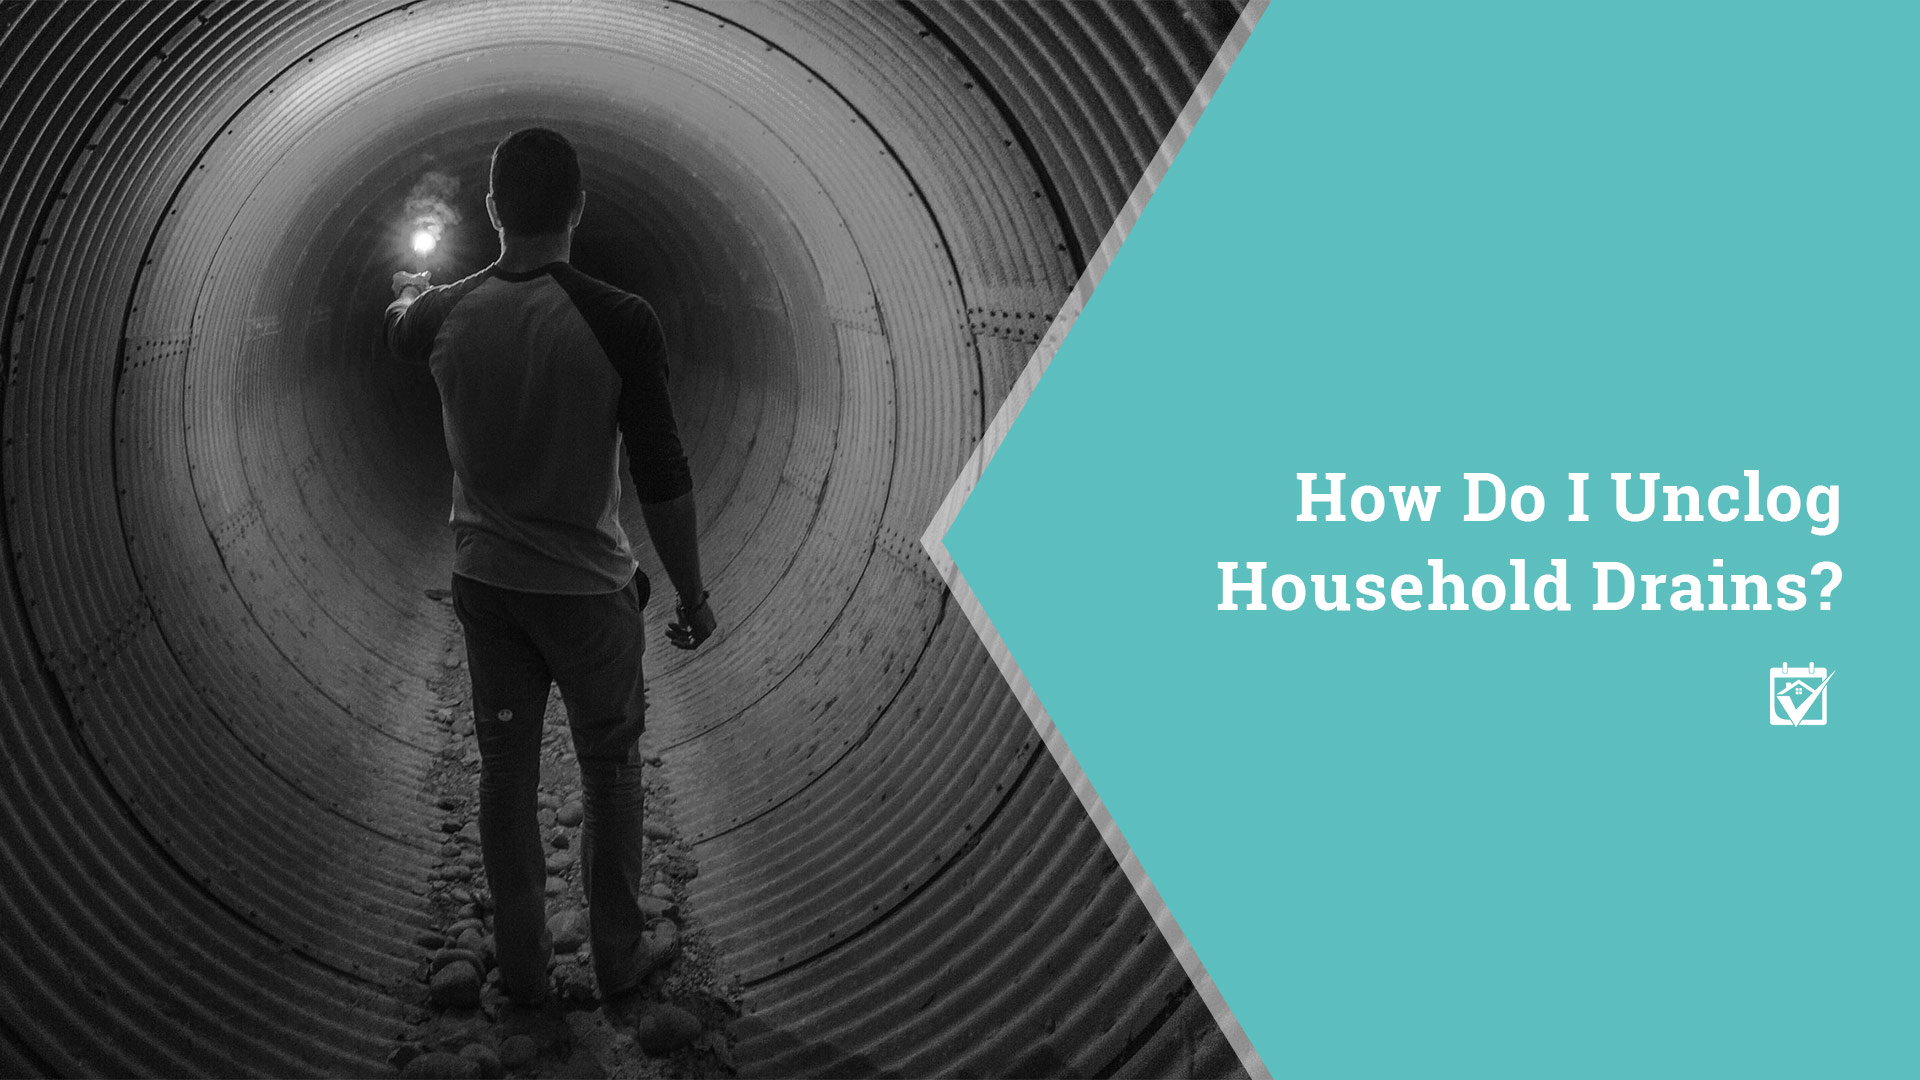 How Do I Unclog Household Drains?